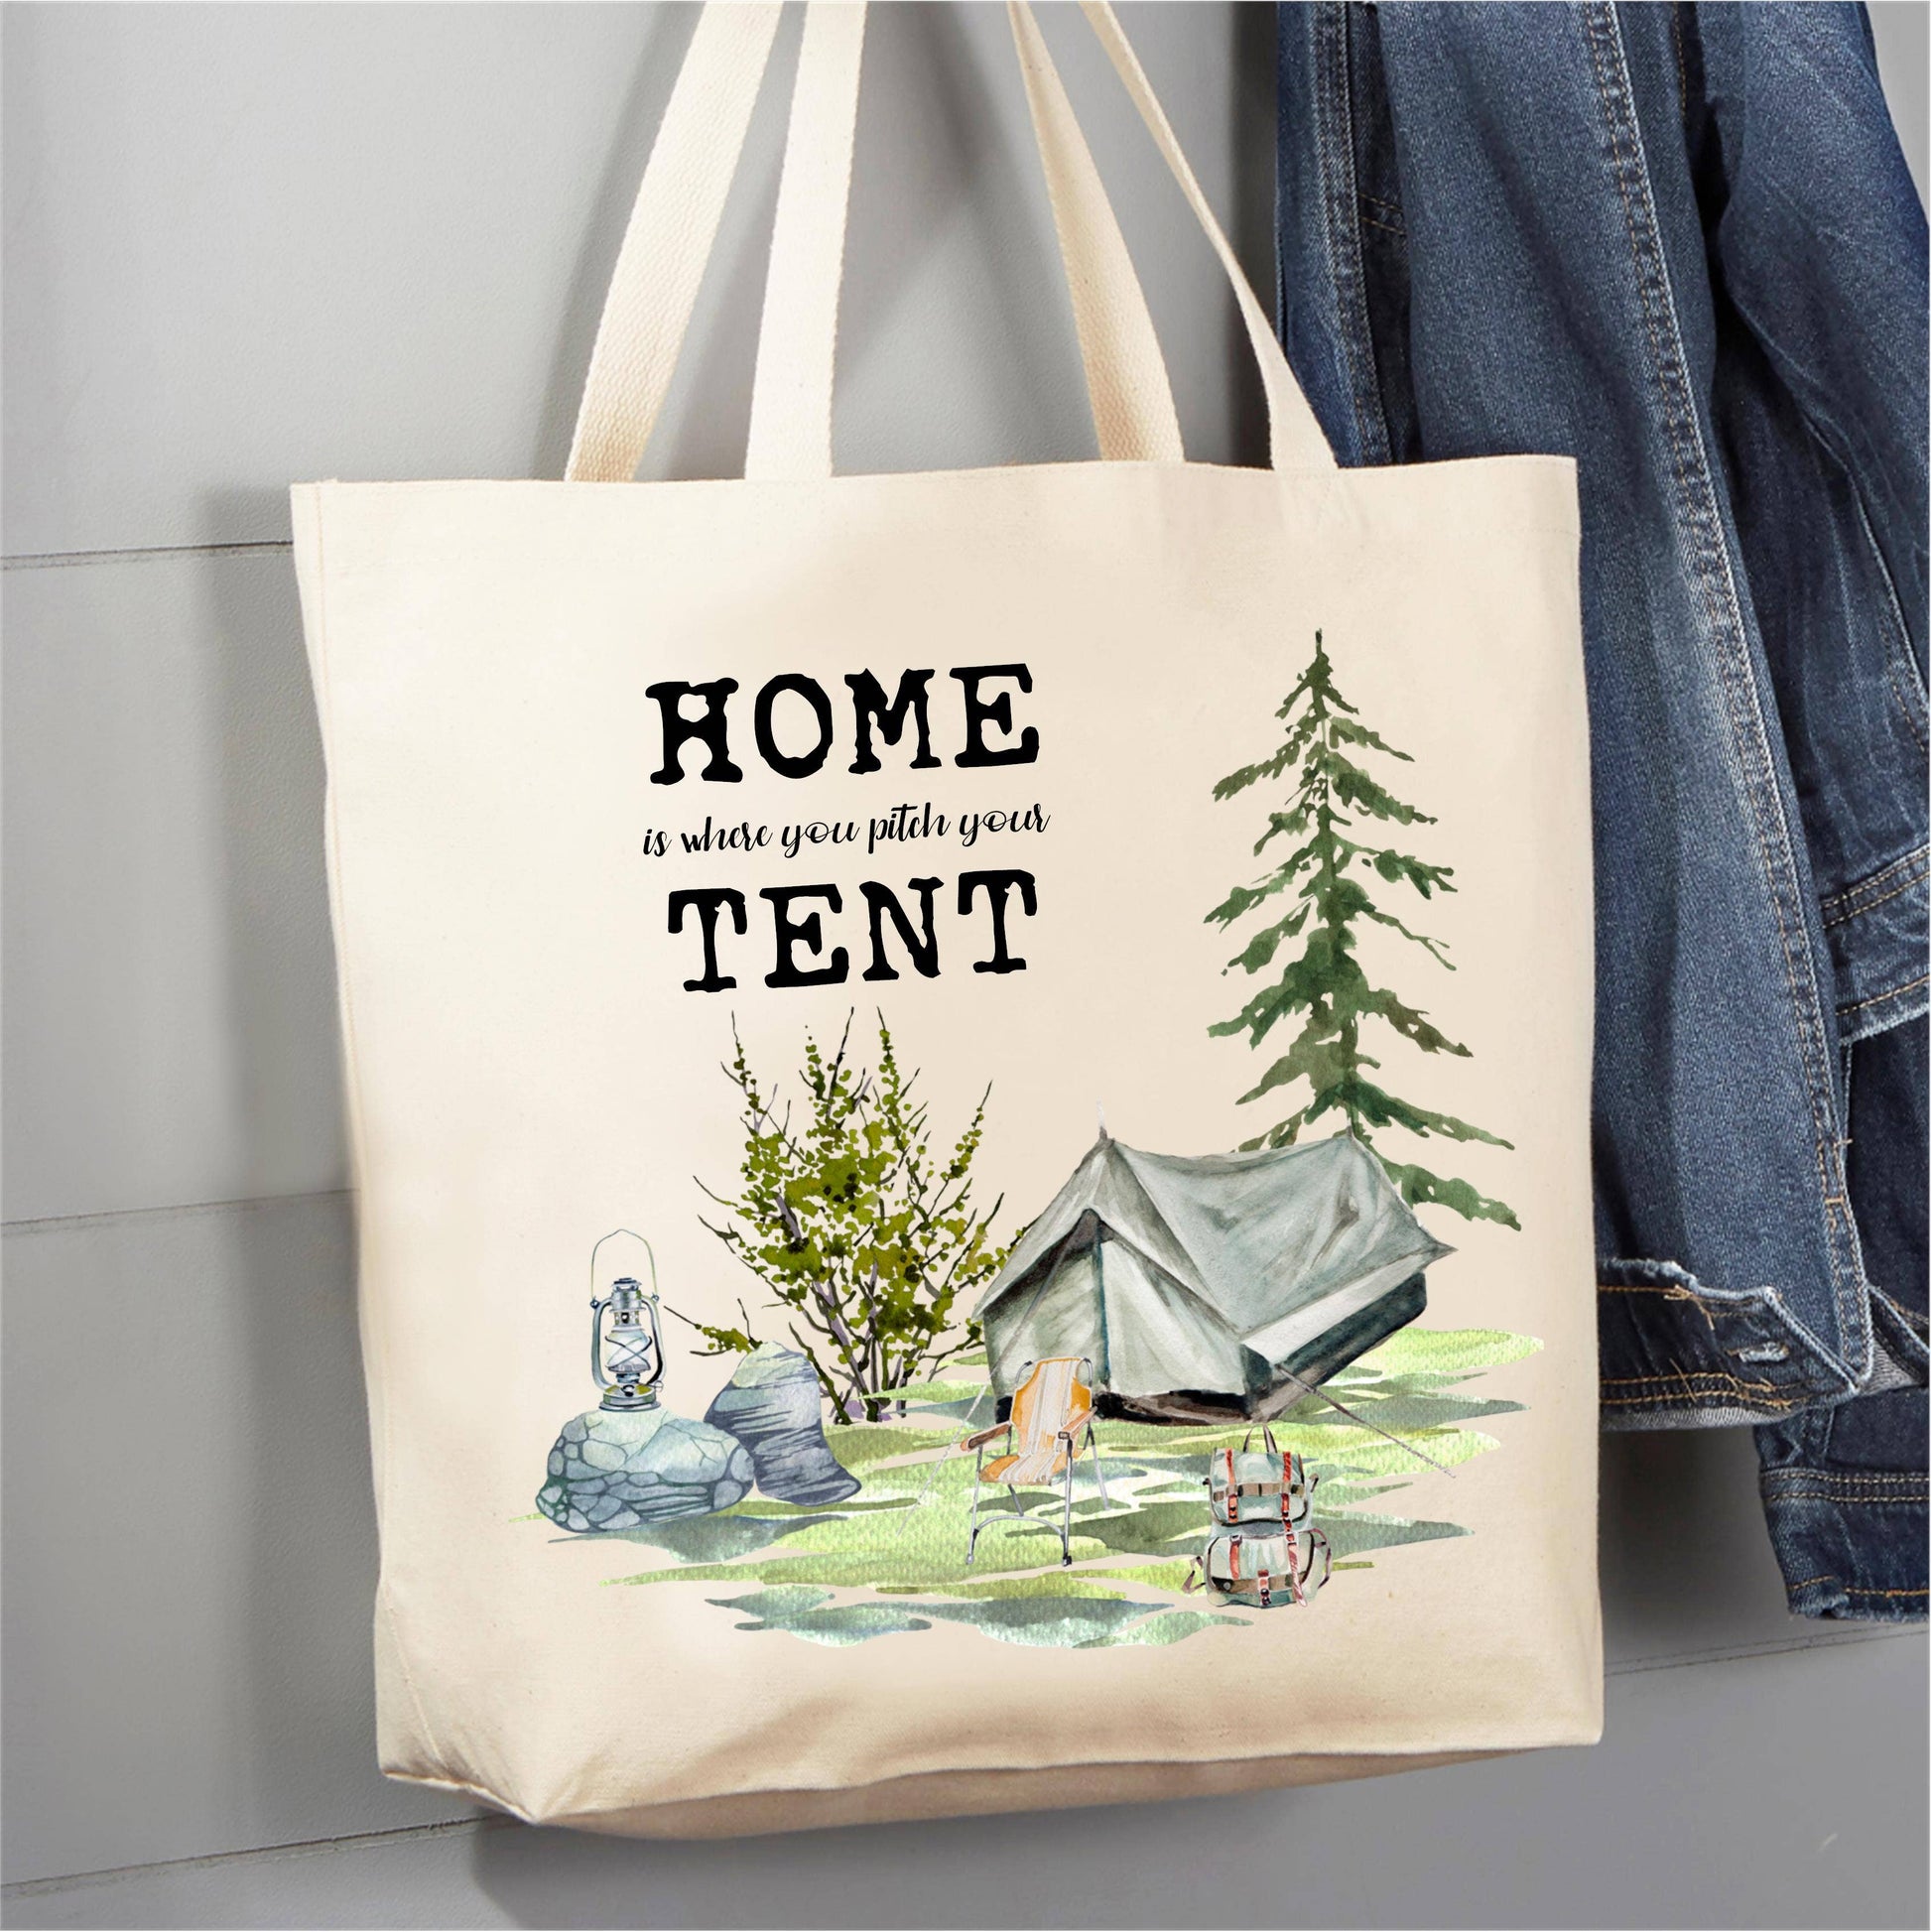 Home is where you pitch your tent 12 oz Canvas Tote Bag